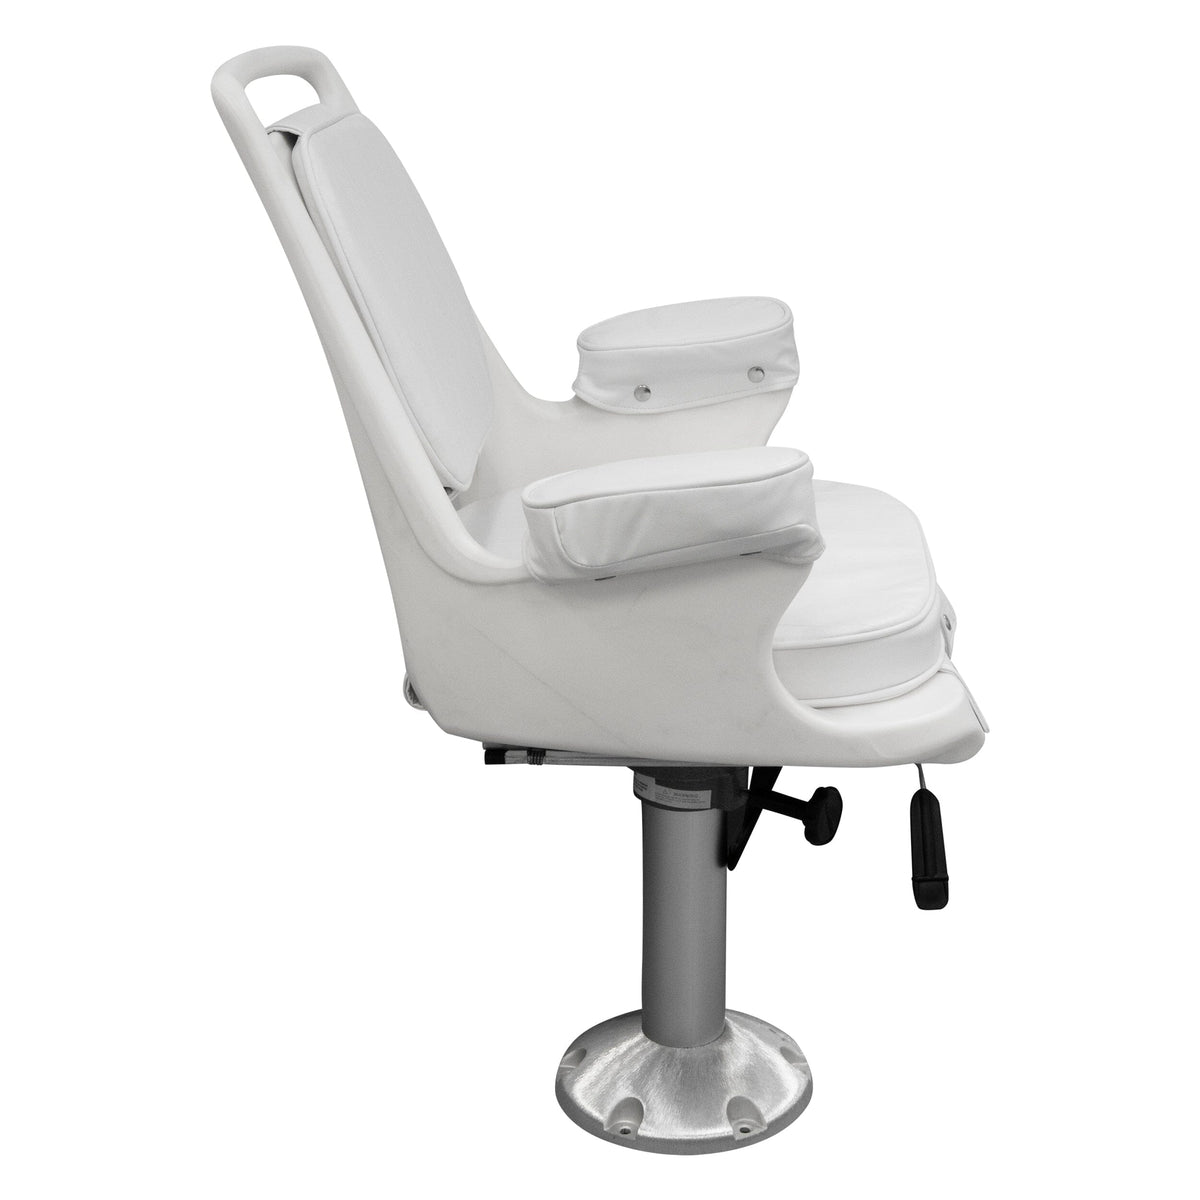 Boat Captains Chairs Helm Pilot Bucket Seat Locking Pedestal Fishing Marine  Pad for sale online